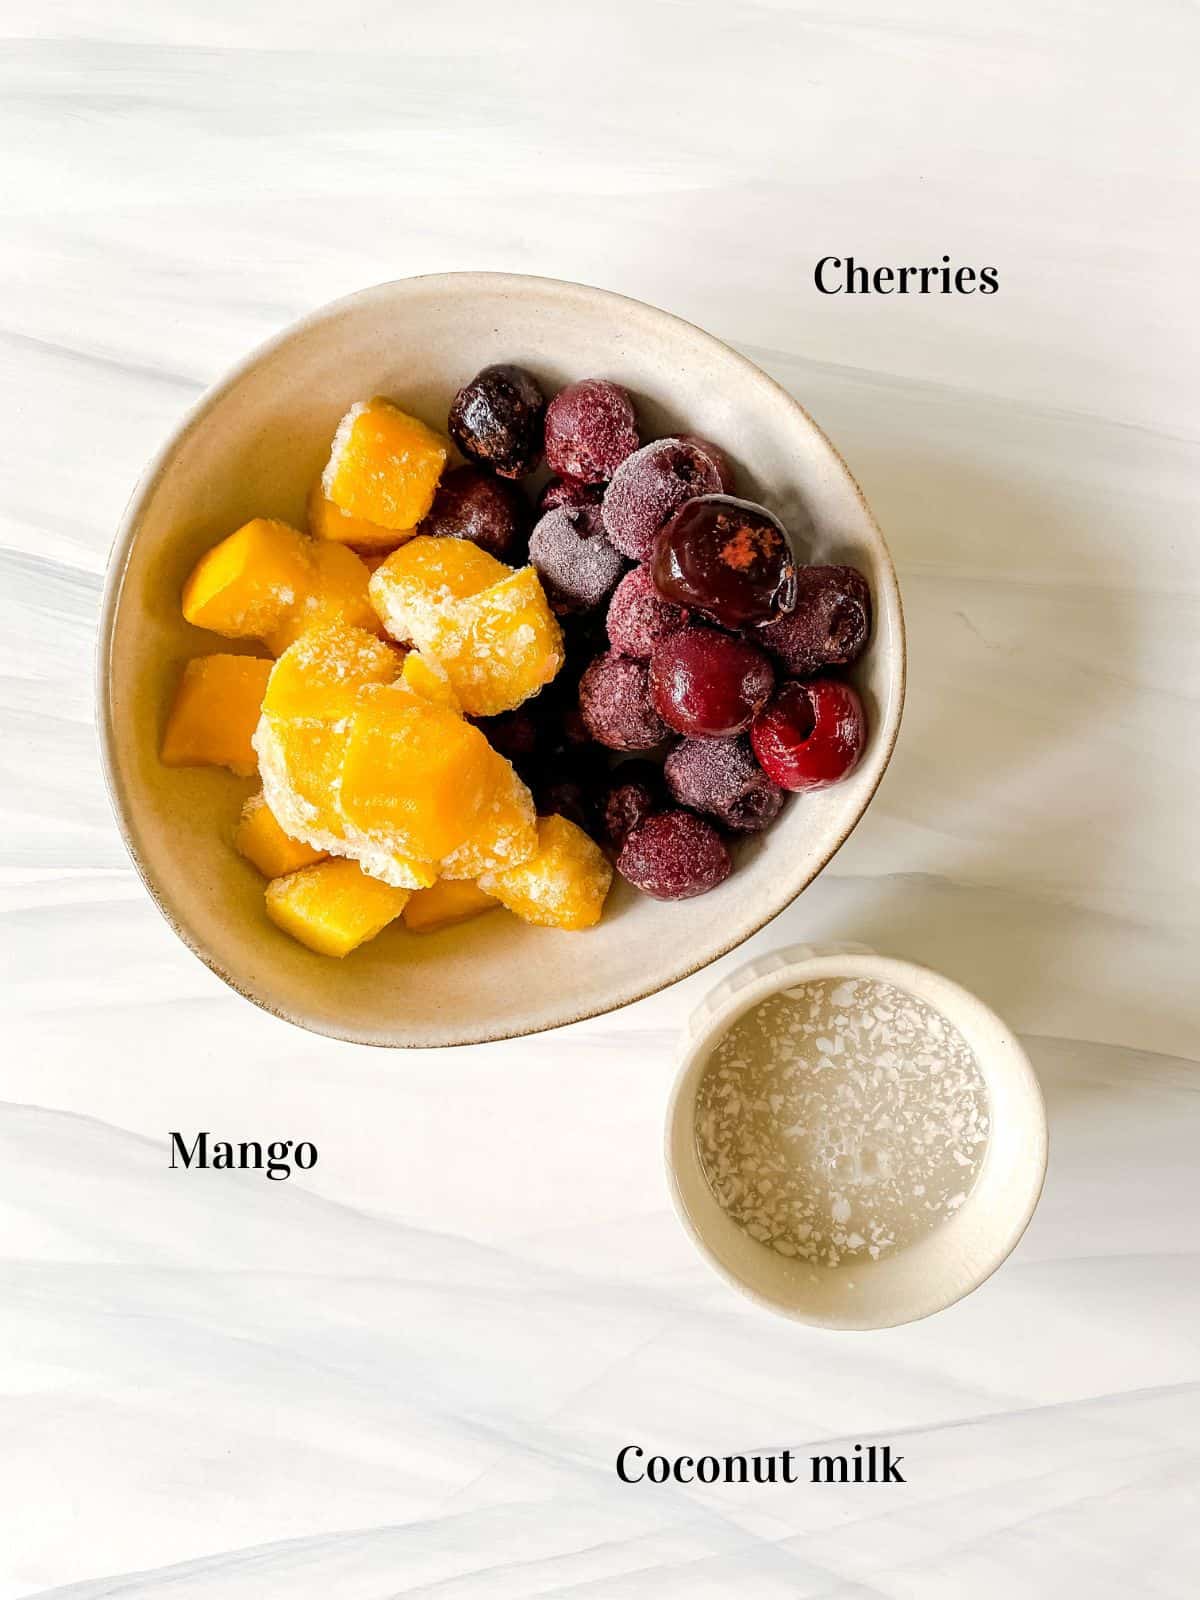 bowl of cherries and mango next to a bowl of coconut milk.